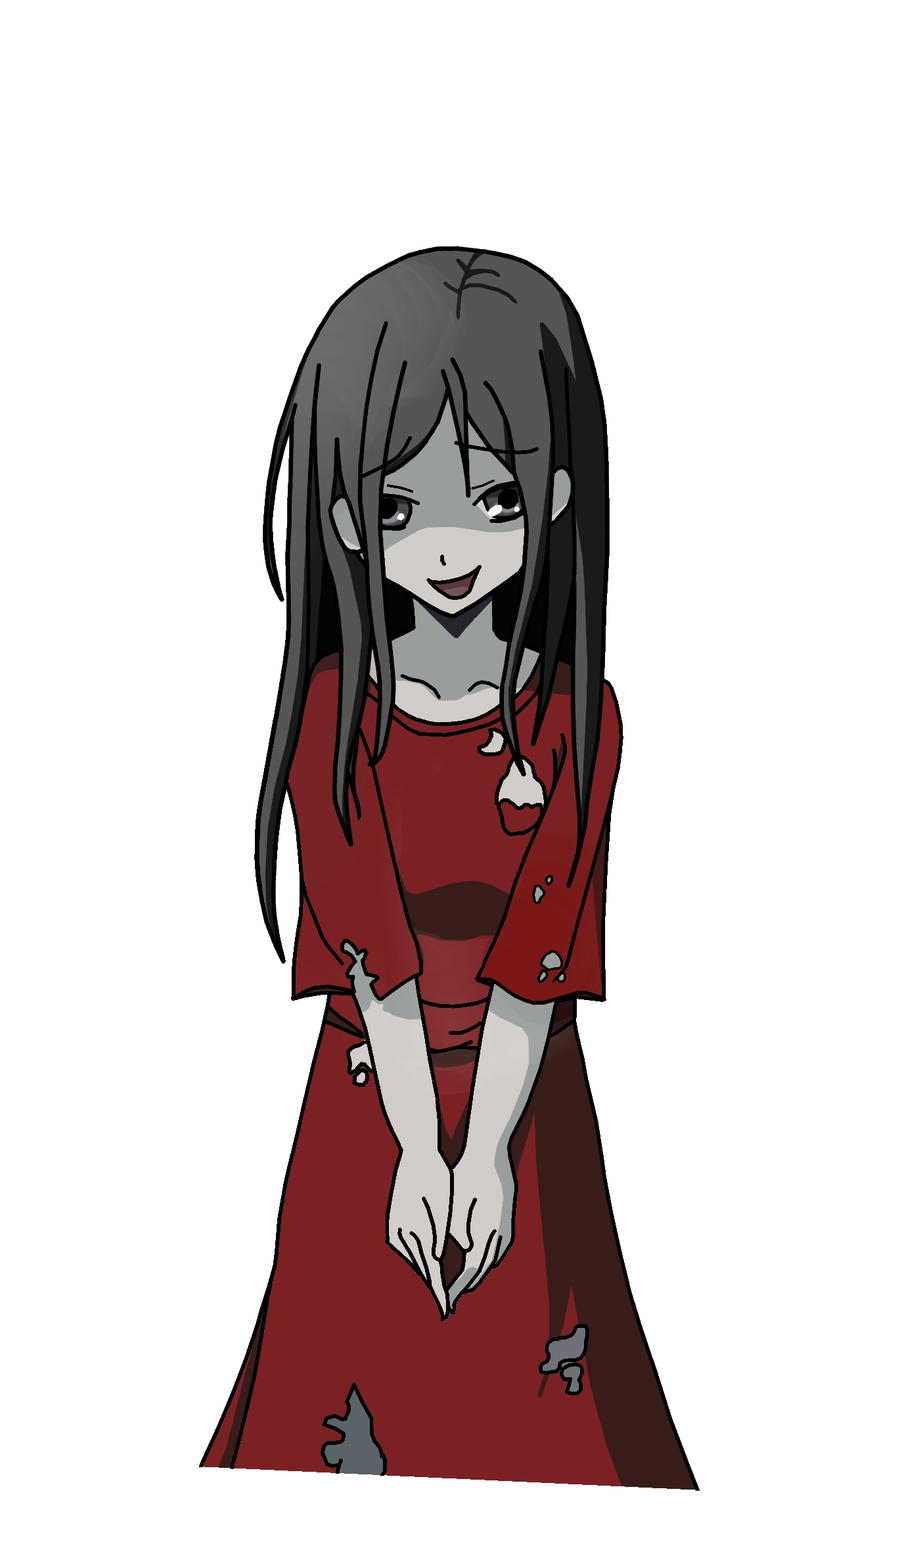 Sachiko Colored by MouseSky on DeviantArt